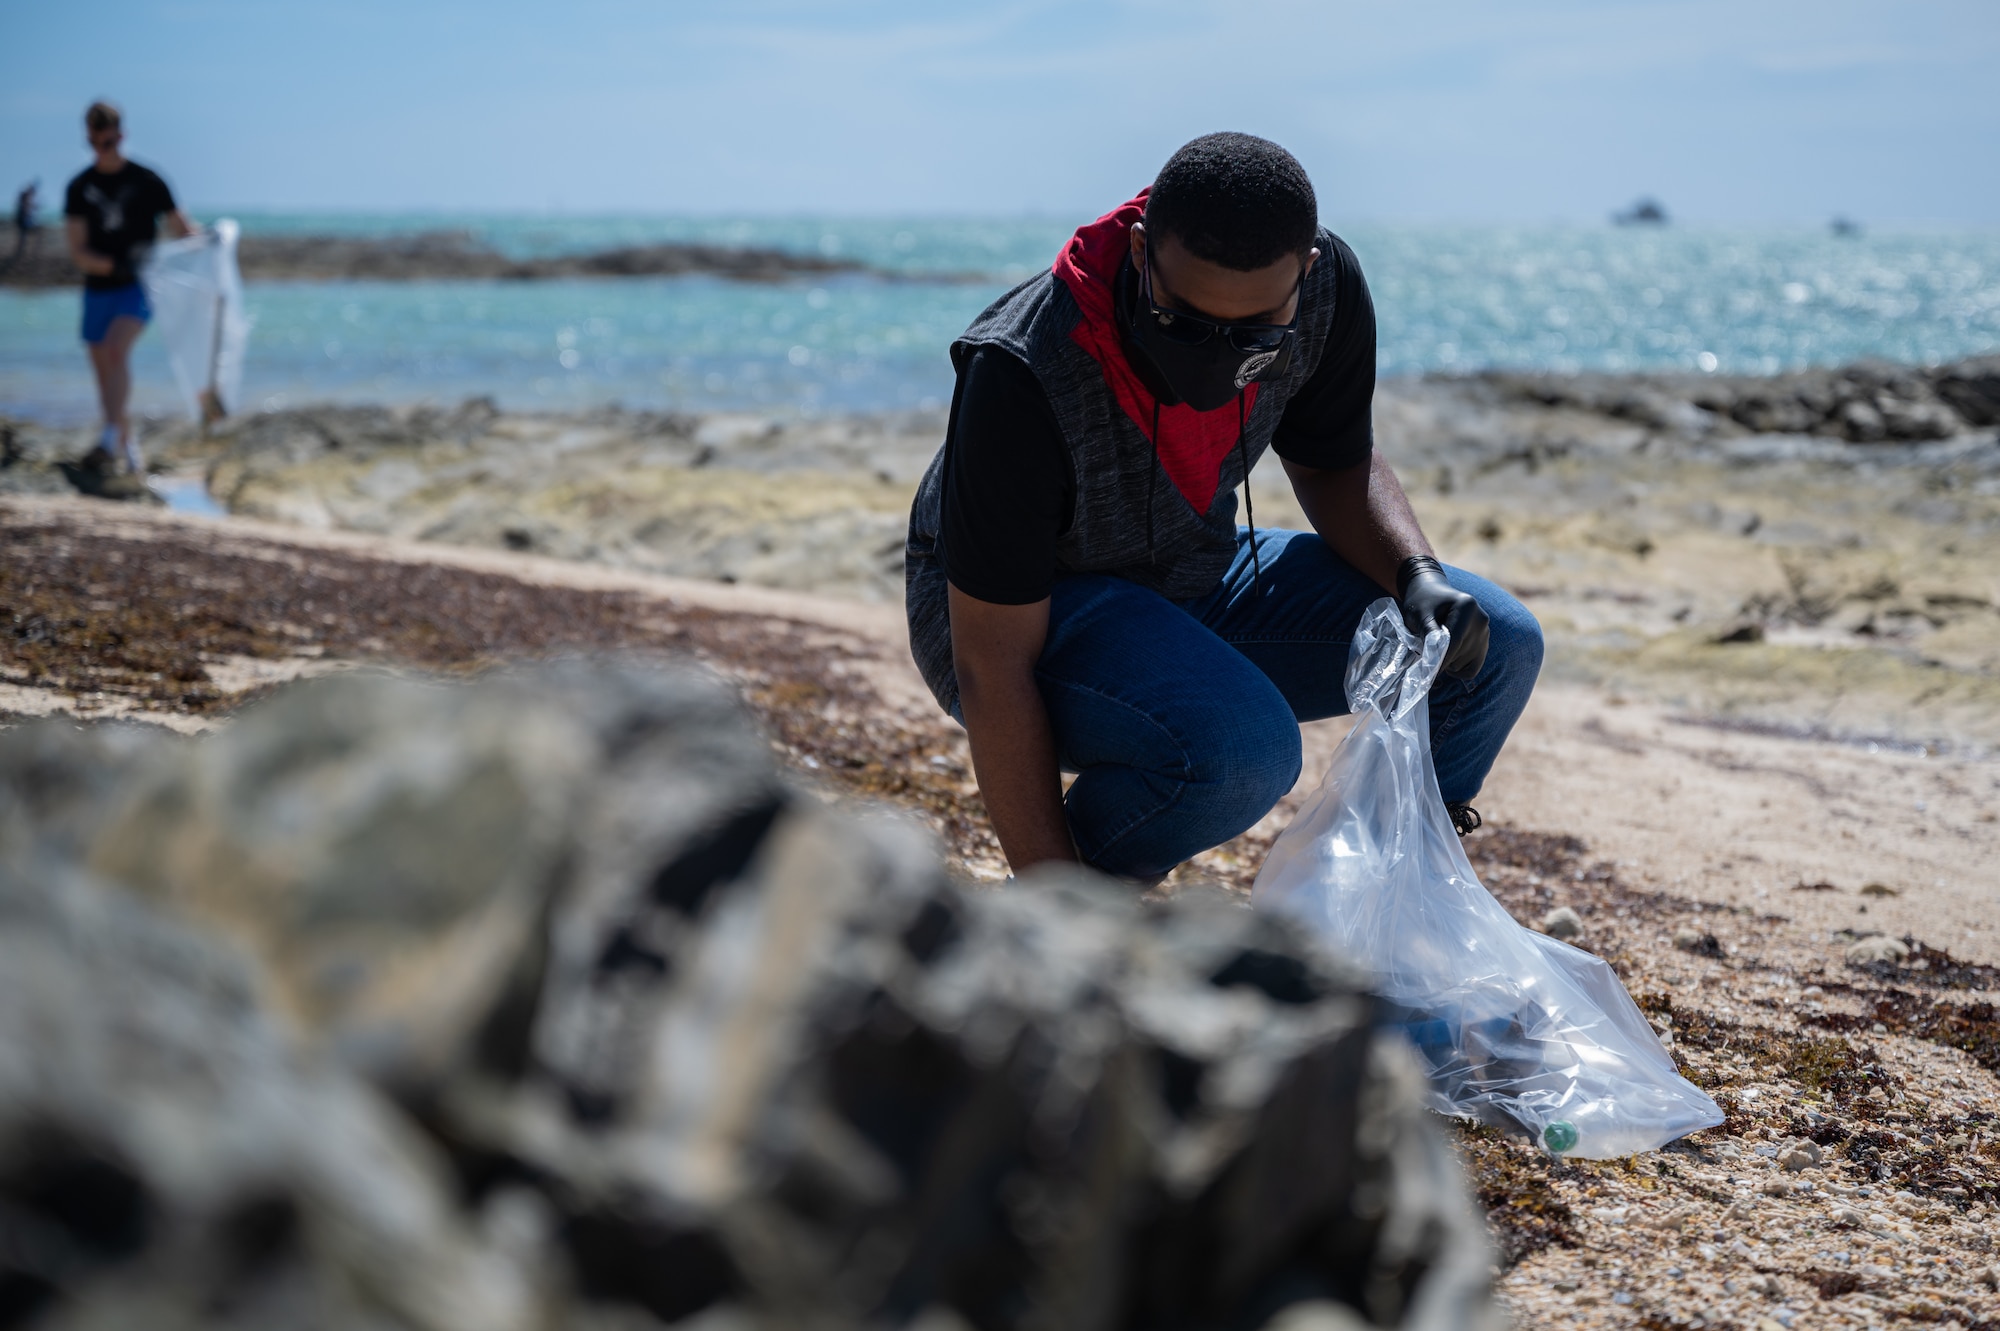 U.S. Air Force Airman Christian Johnson, 353rd Special Operations Support Squadron electrical environmental apprentice, picks up garbage at Seaglass Beach on Okinawa, Japan, Aug. 21, 2021. Beach clean-ups not only benefit the local wildlife, but can also help ecosystems globally since trash can be carried by the ocean. (U.S. Air Force photo by Airman 1st Class Stephen Pulter)